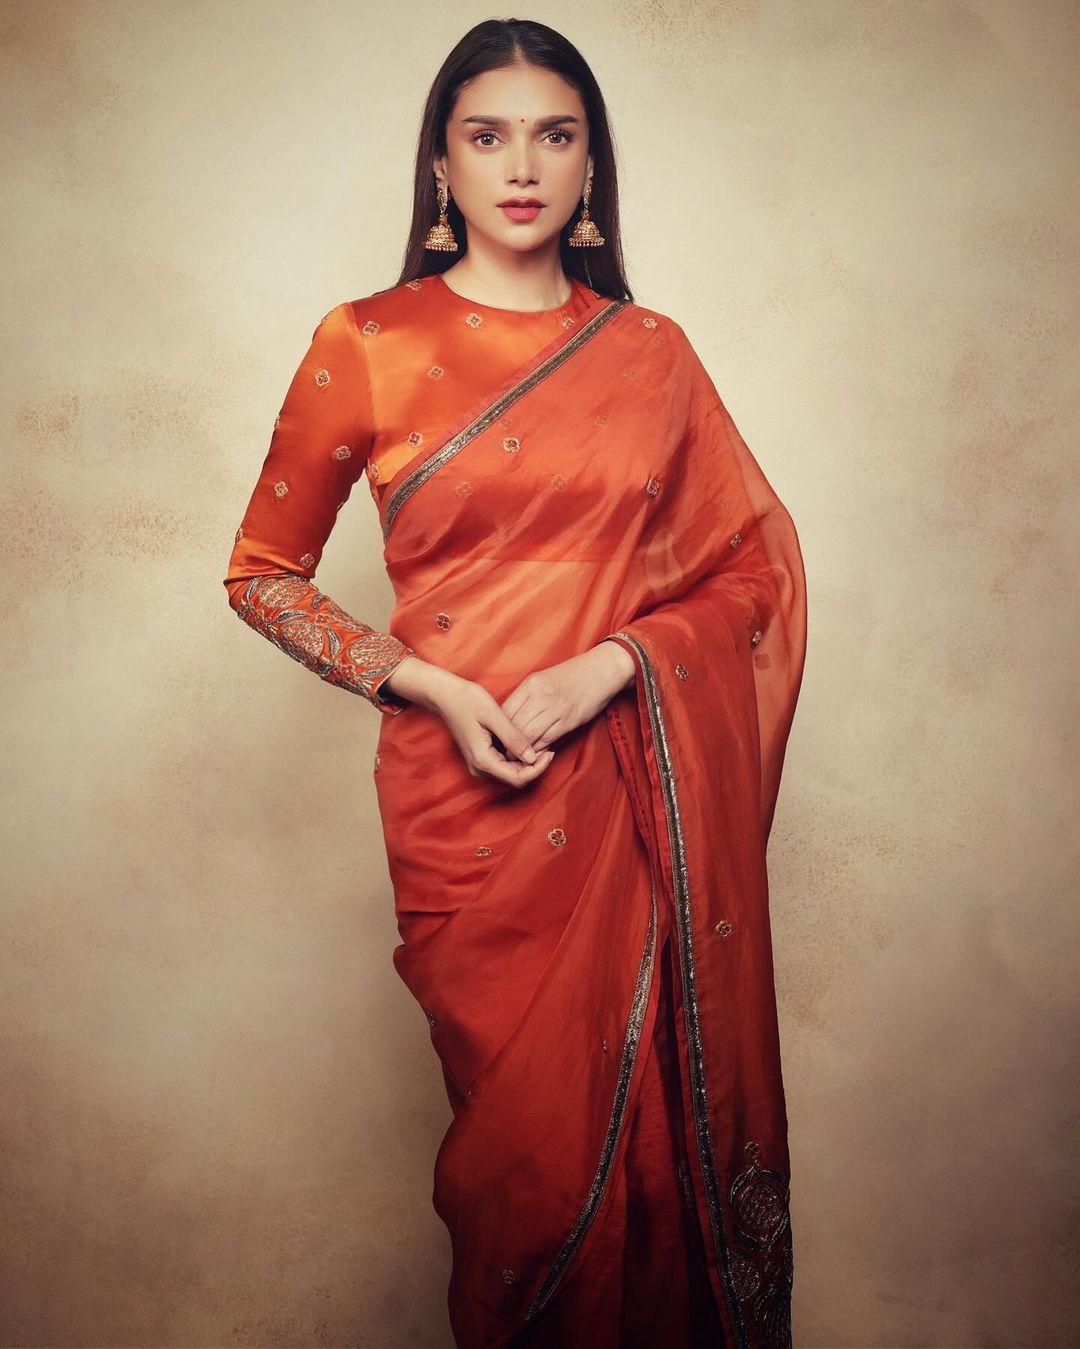 In this look, Aditi wore a stunning sheer orange saree with intricate minimal work on it. The plain saree with a stunning thin border enhanced her look